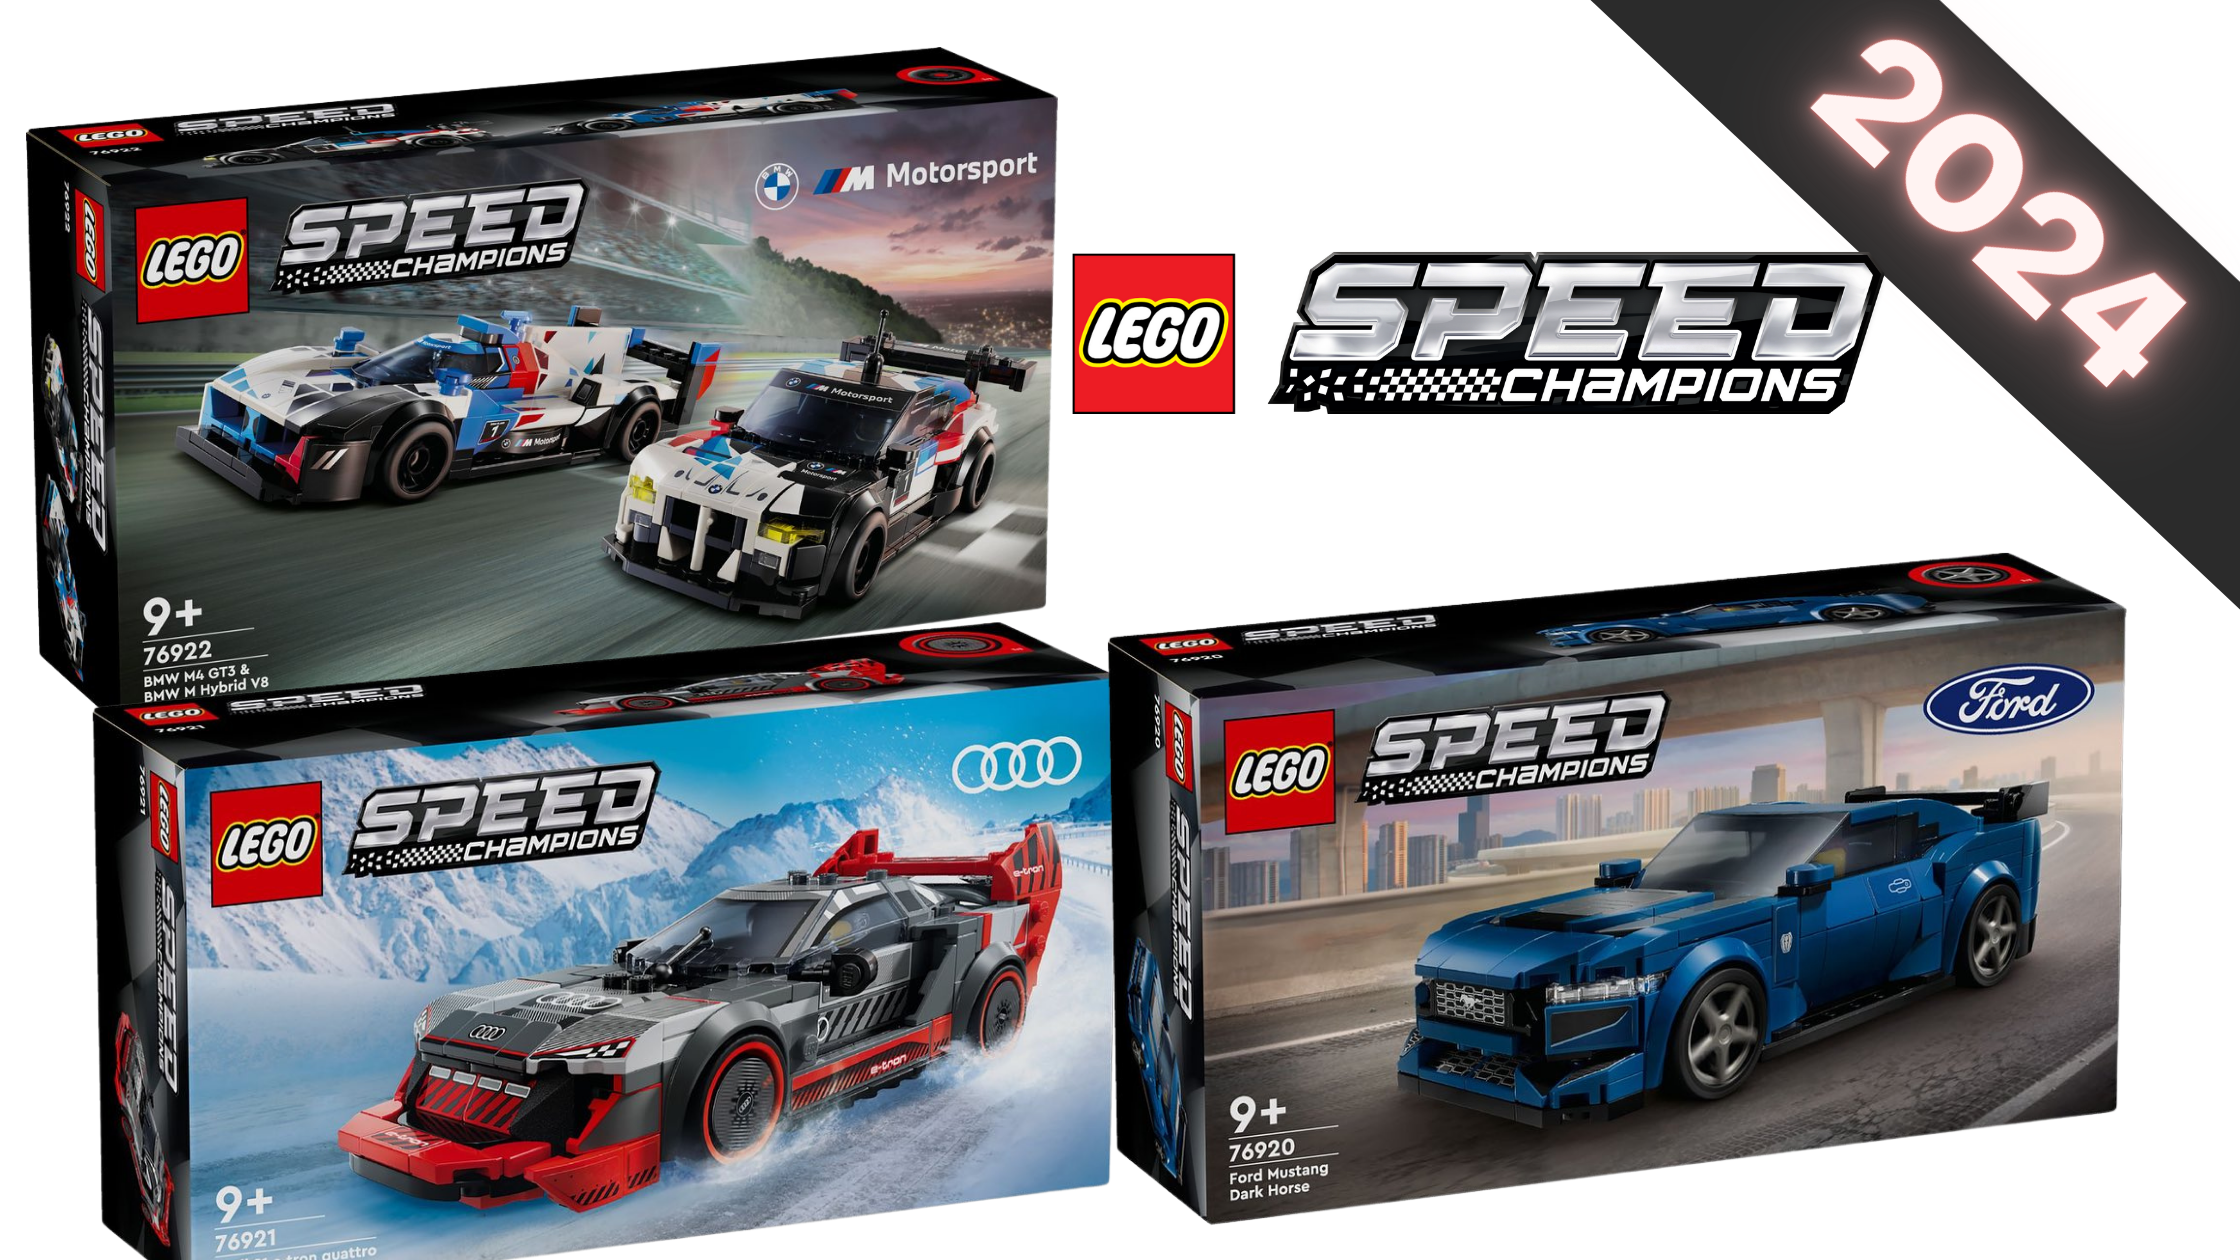 2018 LEGO Speed Champions sets revealed [News] - The Brothers